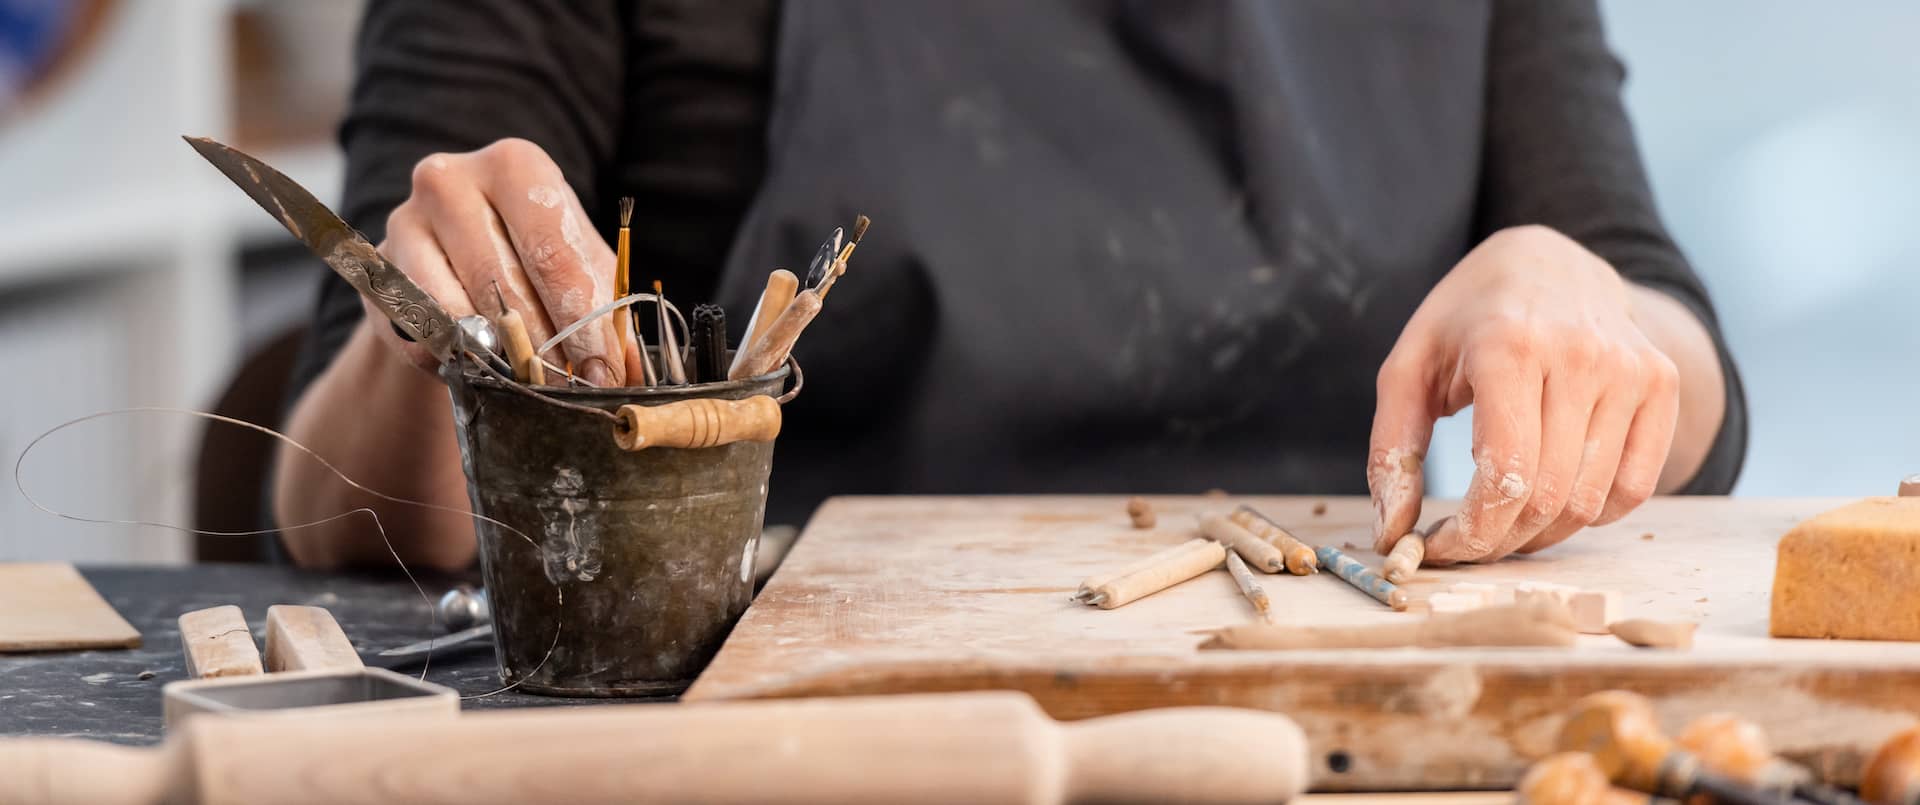 15 Tips on Setting Up a Home Pottery Studio on a Budget